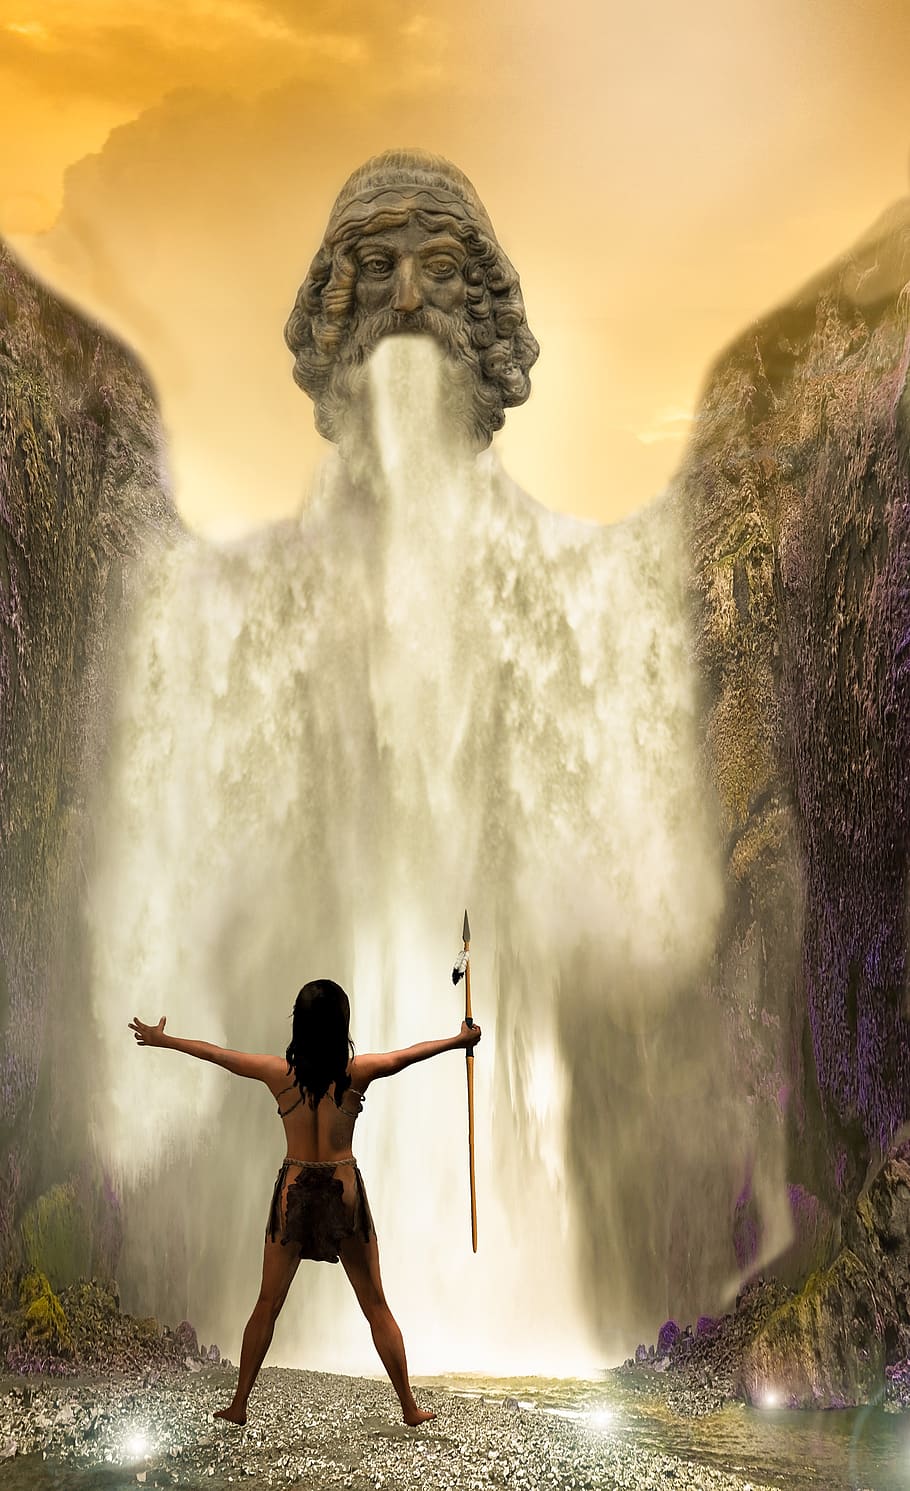 waterfall, water, girl, warrior, river, lights, fantasia, motion, lifestyles, real people